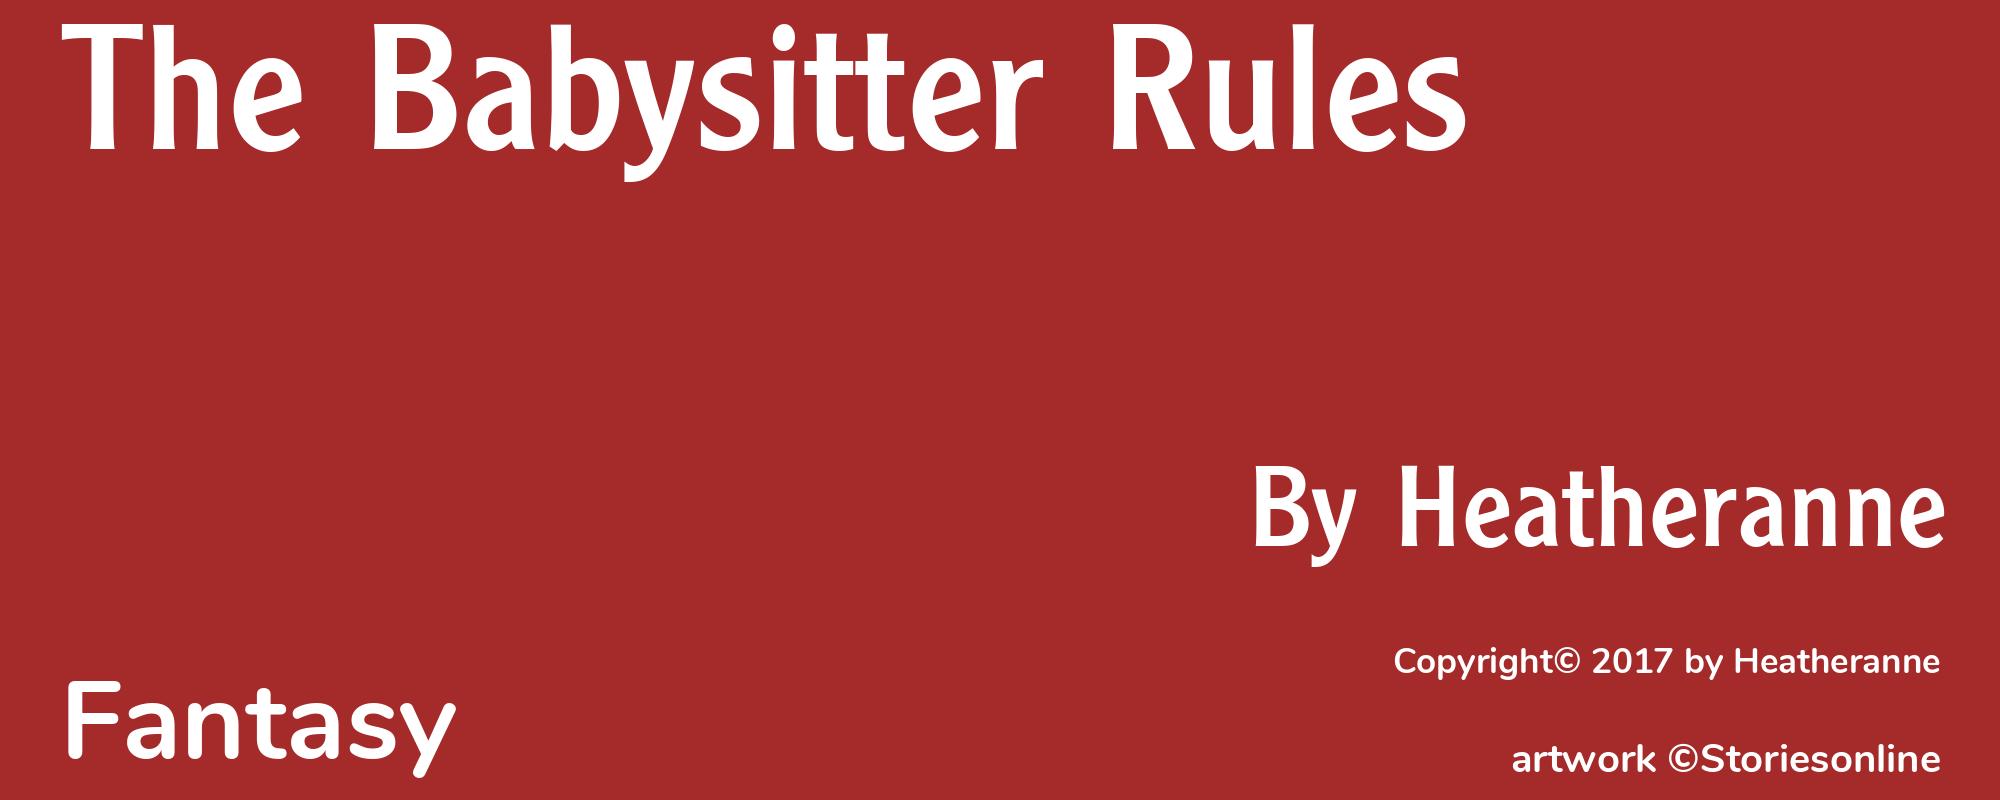 The Babysitter Rules - Cover